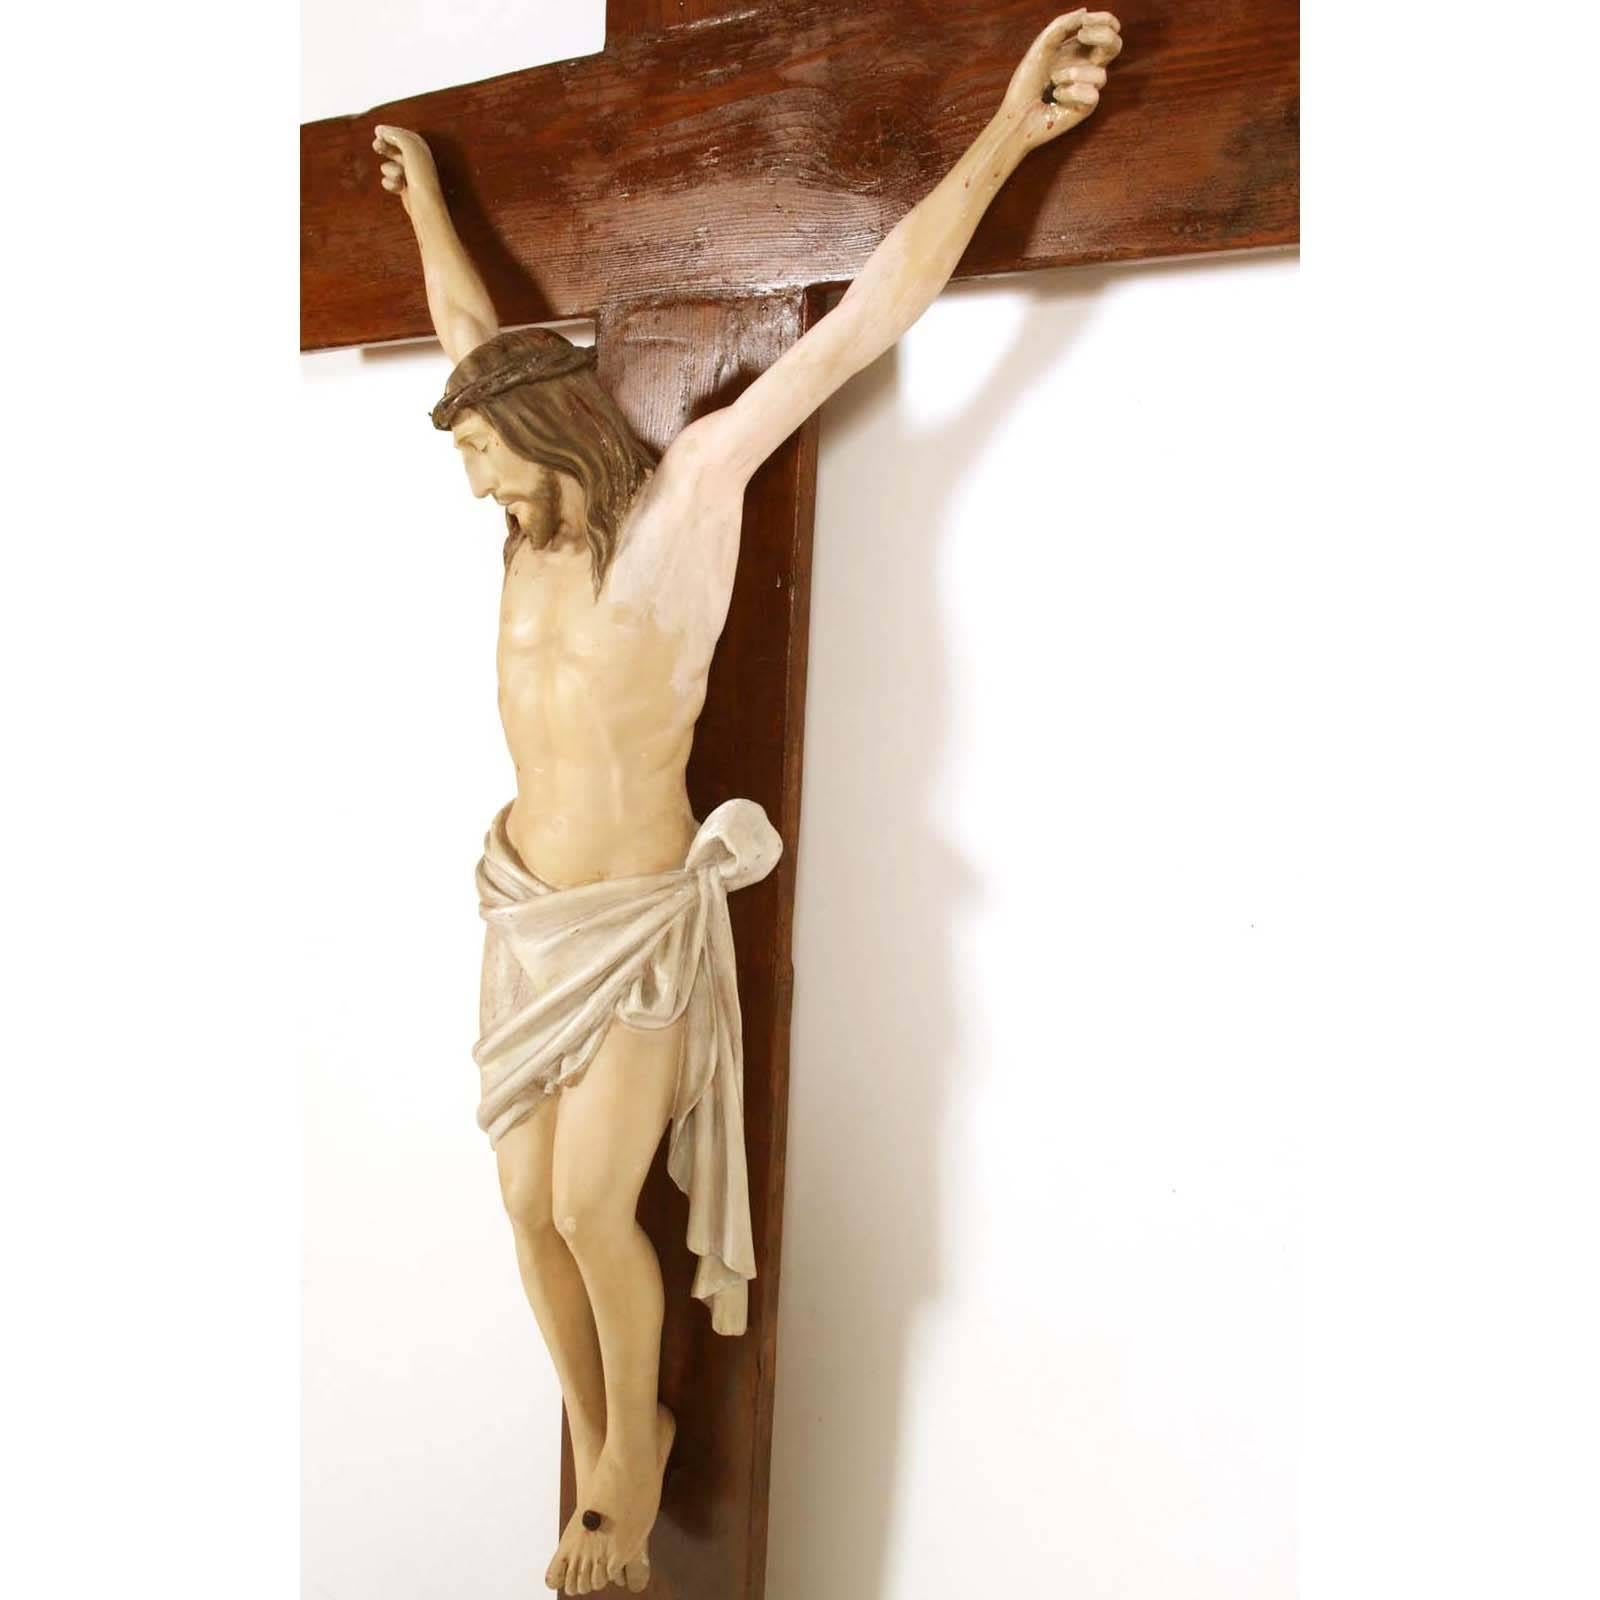 Neoclassical Revival Late 19th Century Polychrome Wood Crucifix Attributable to Vincenzo Cadorin